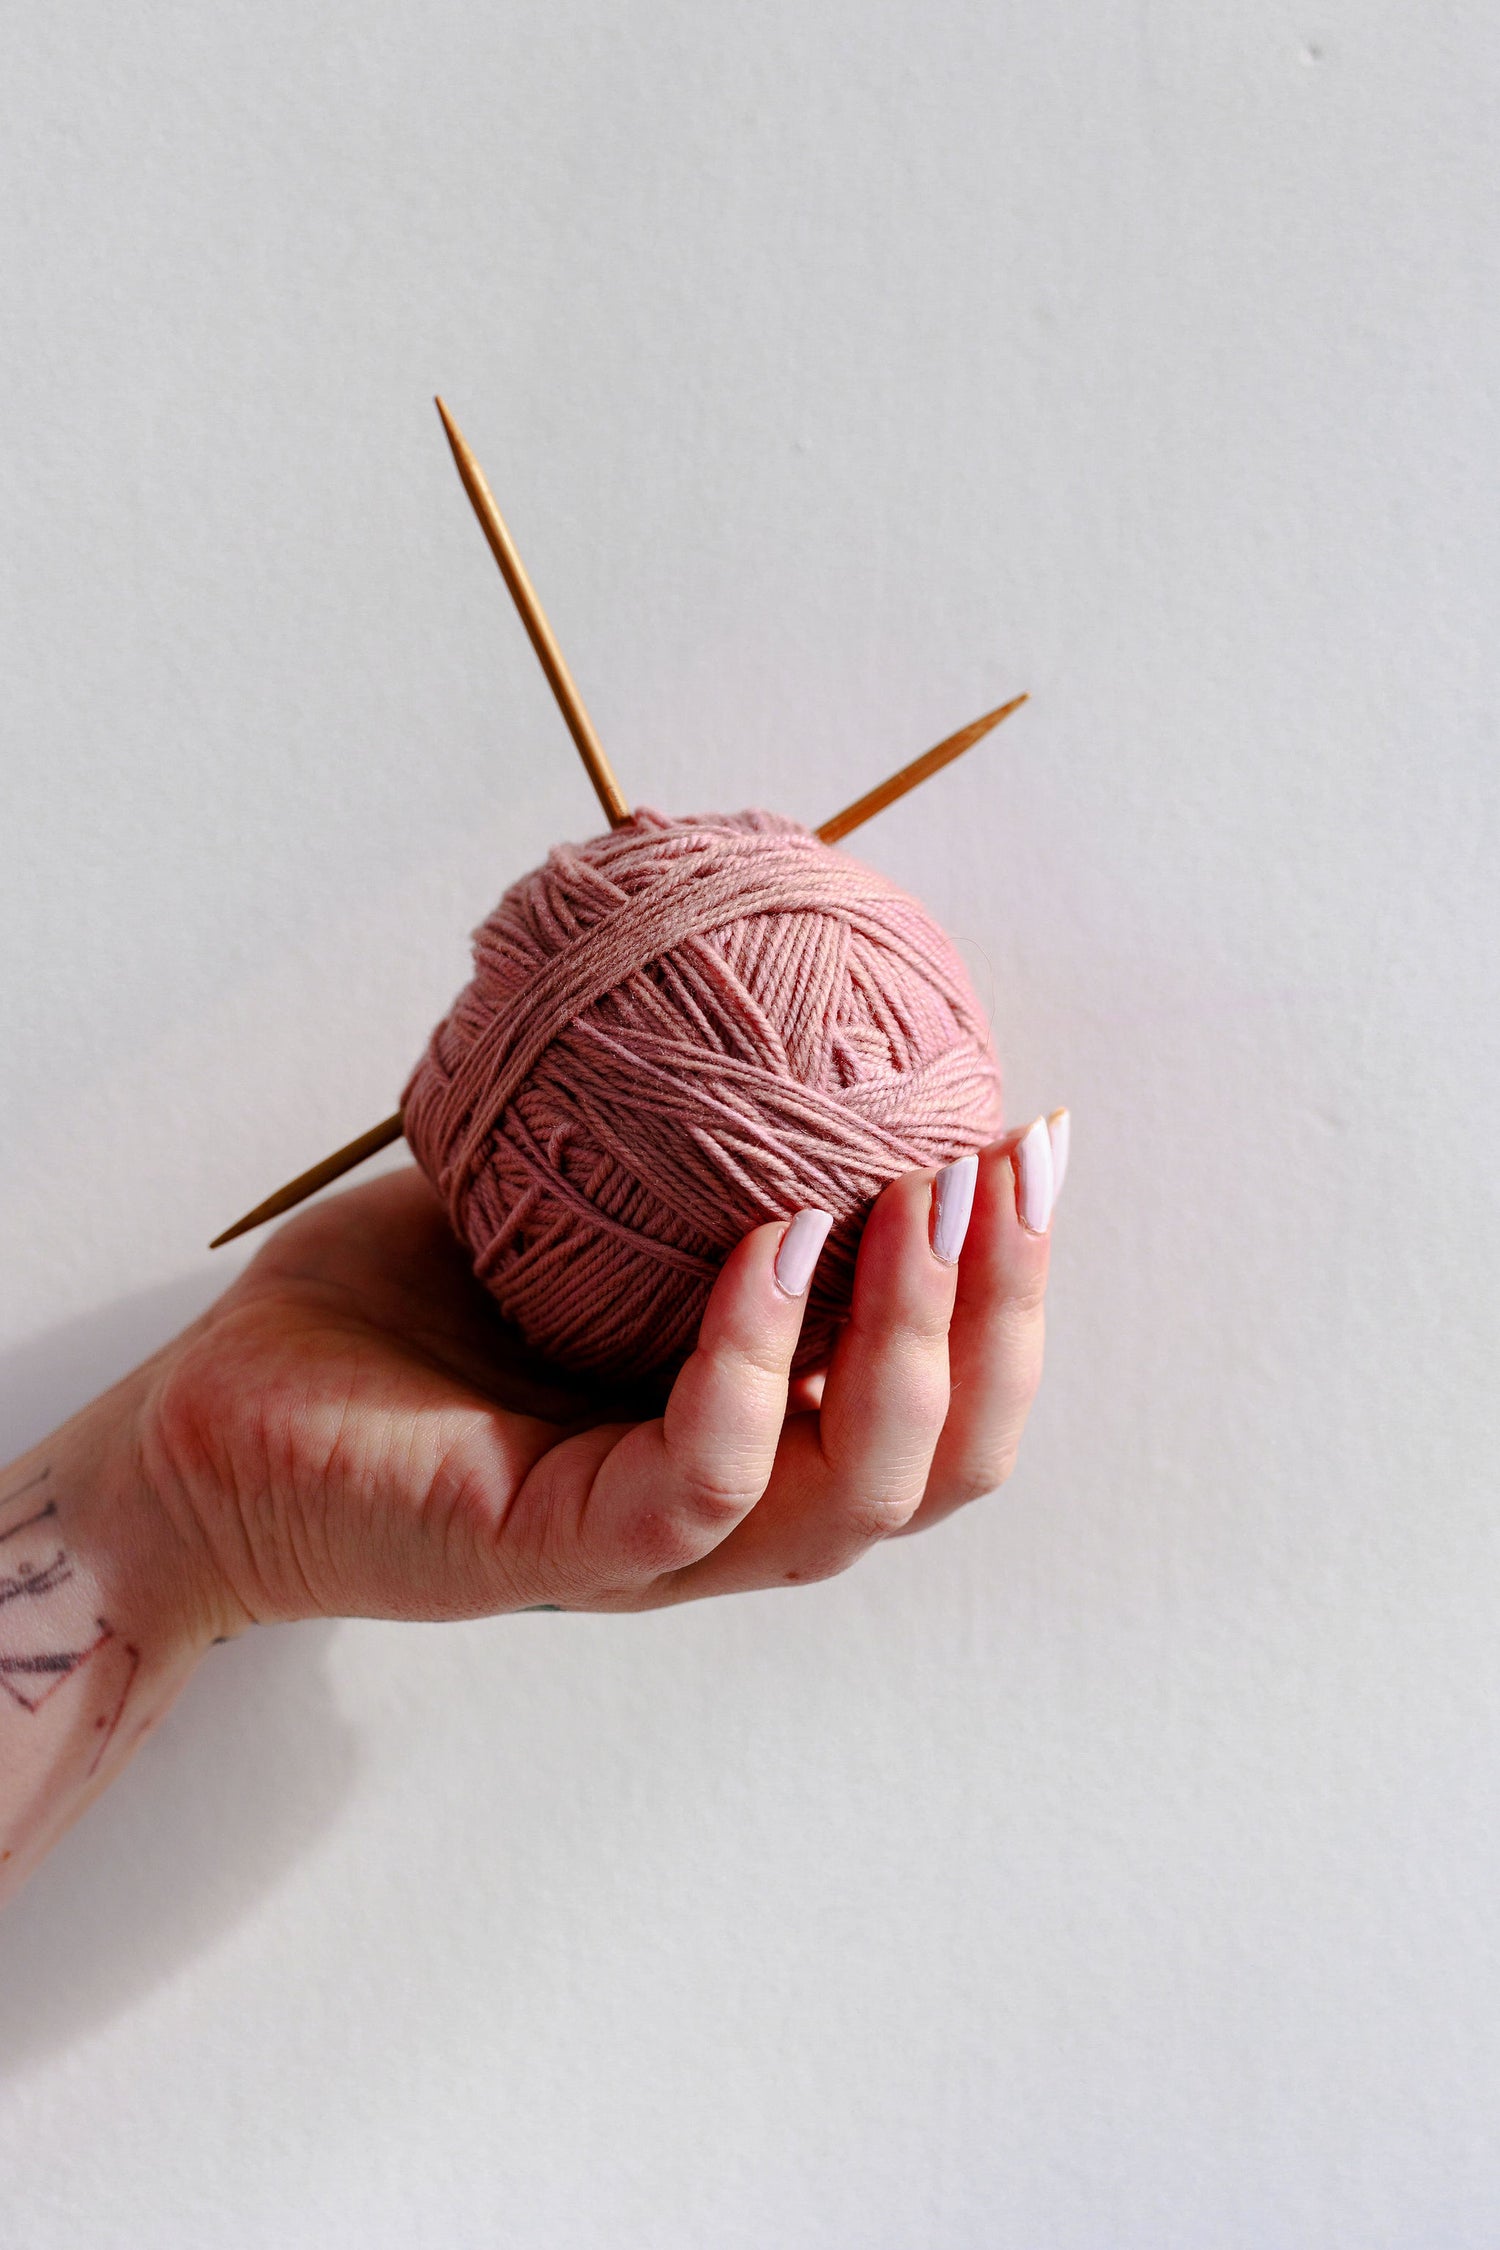 Bess' hand holds a pink ball of yarn, with two knitting needles in it.